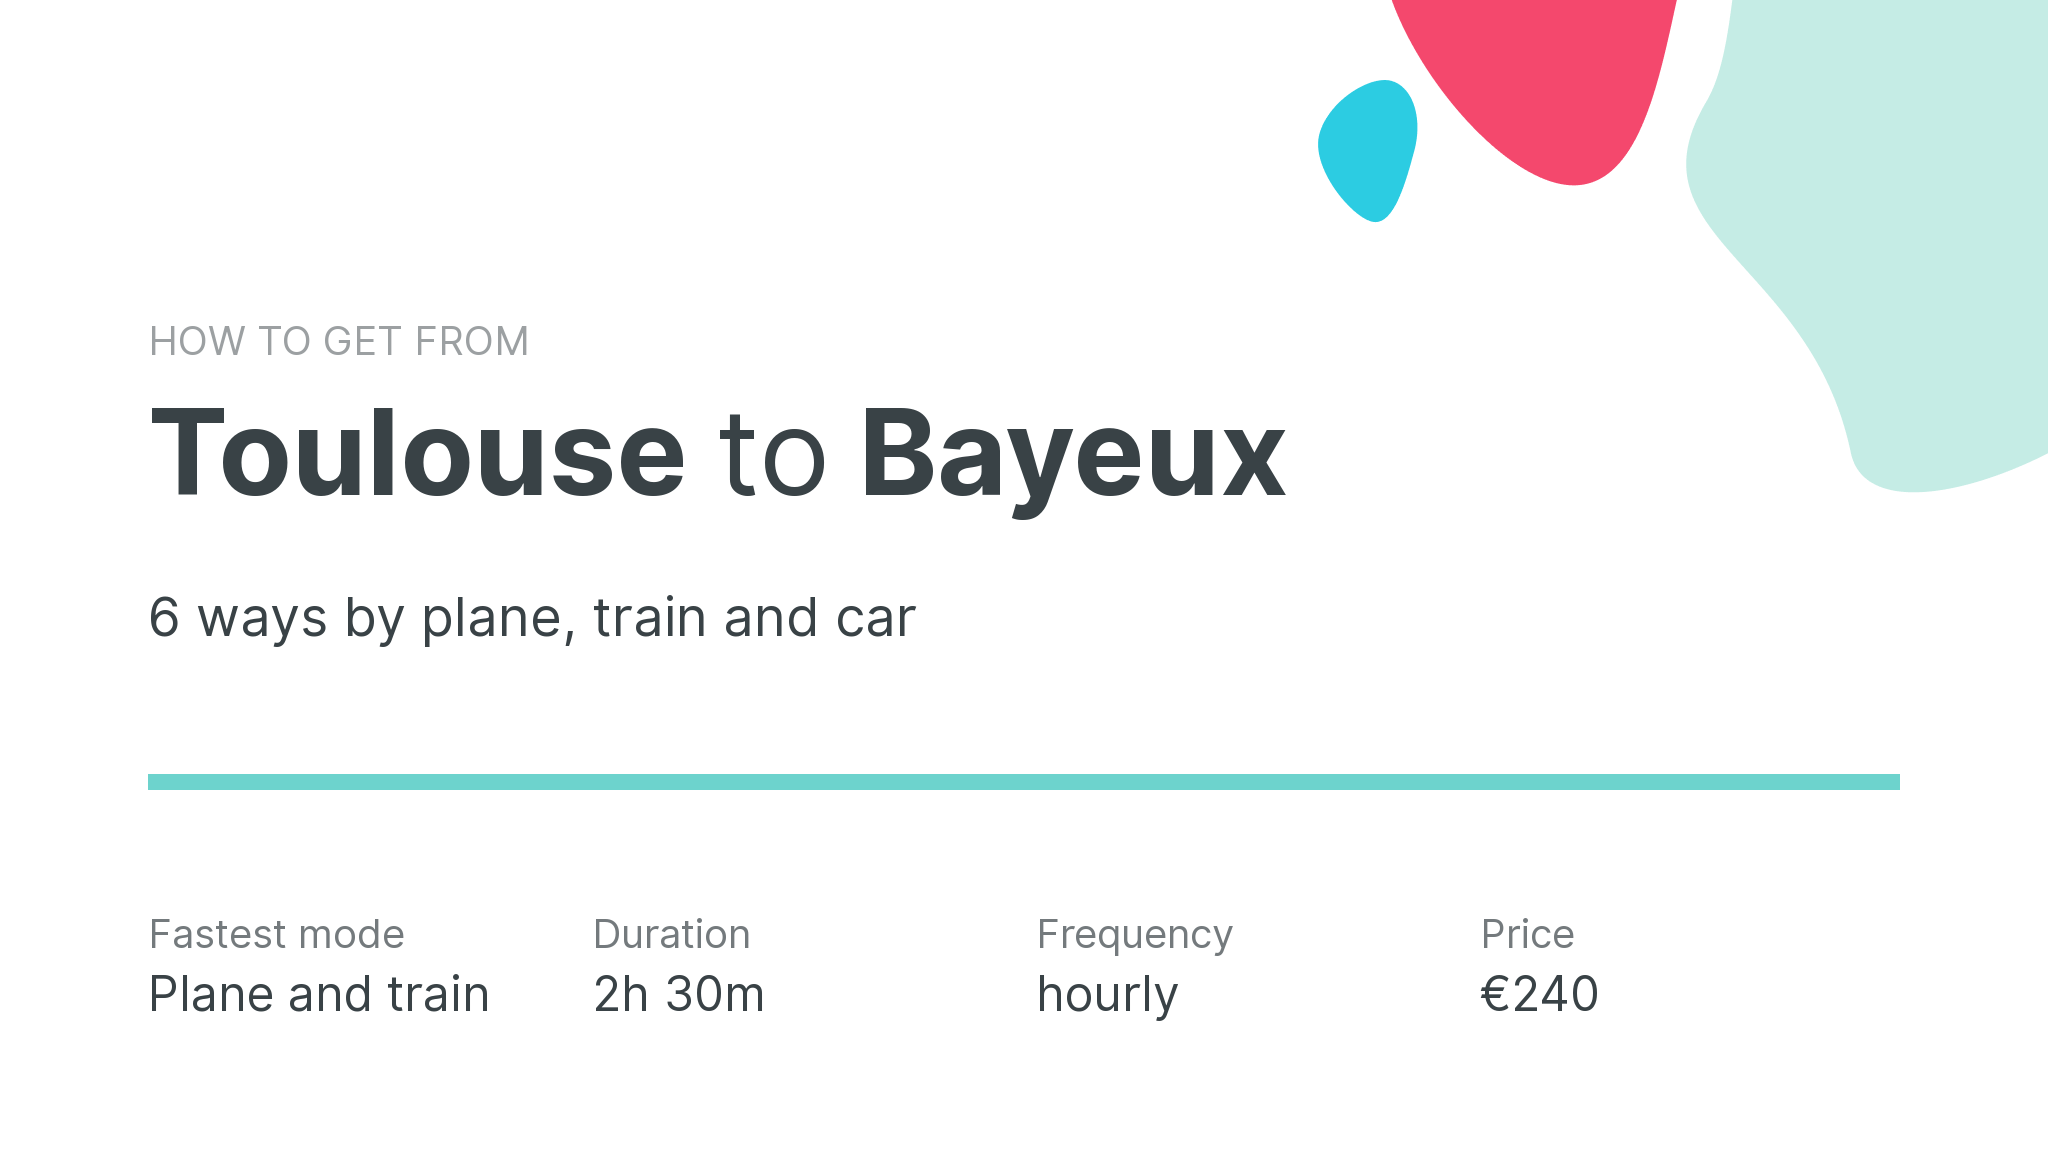 How do I get from Toulouse to Bayeux